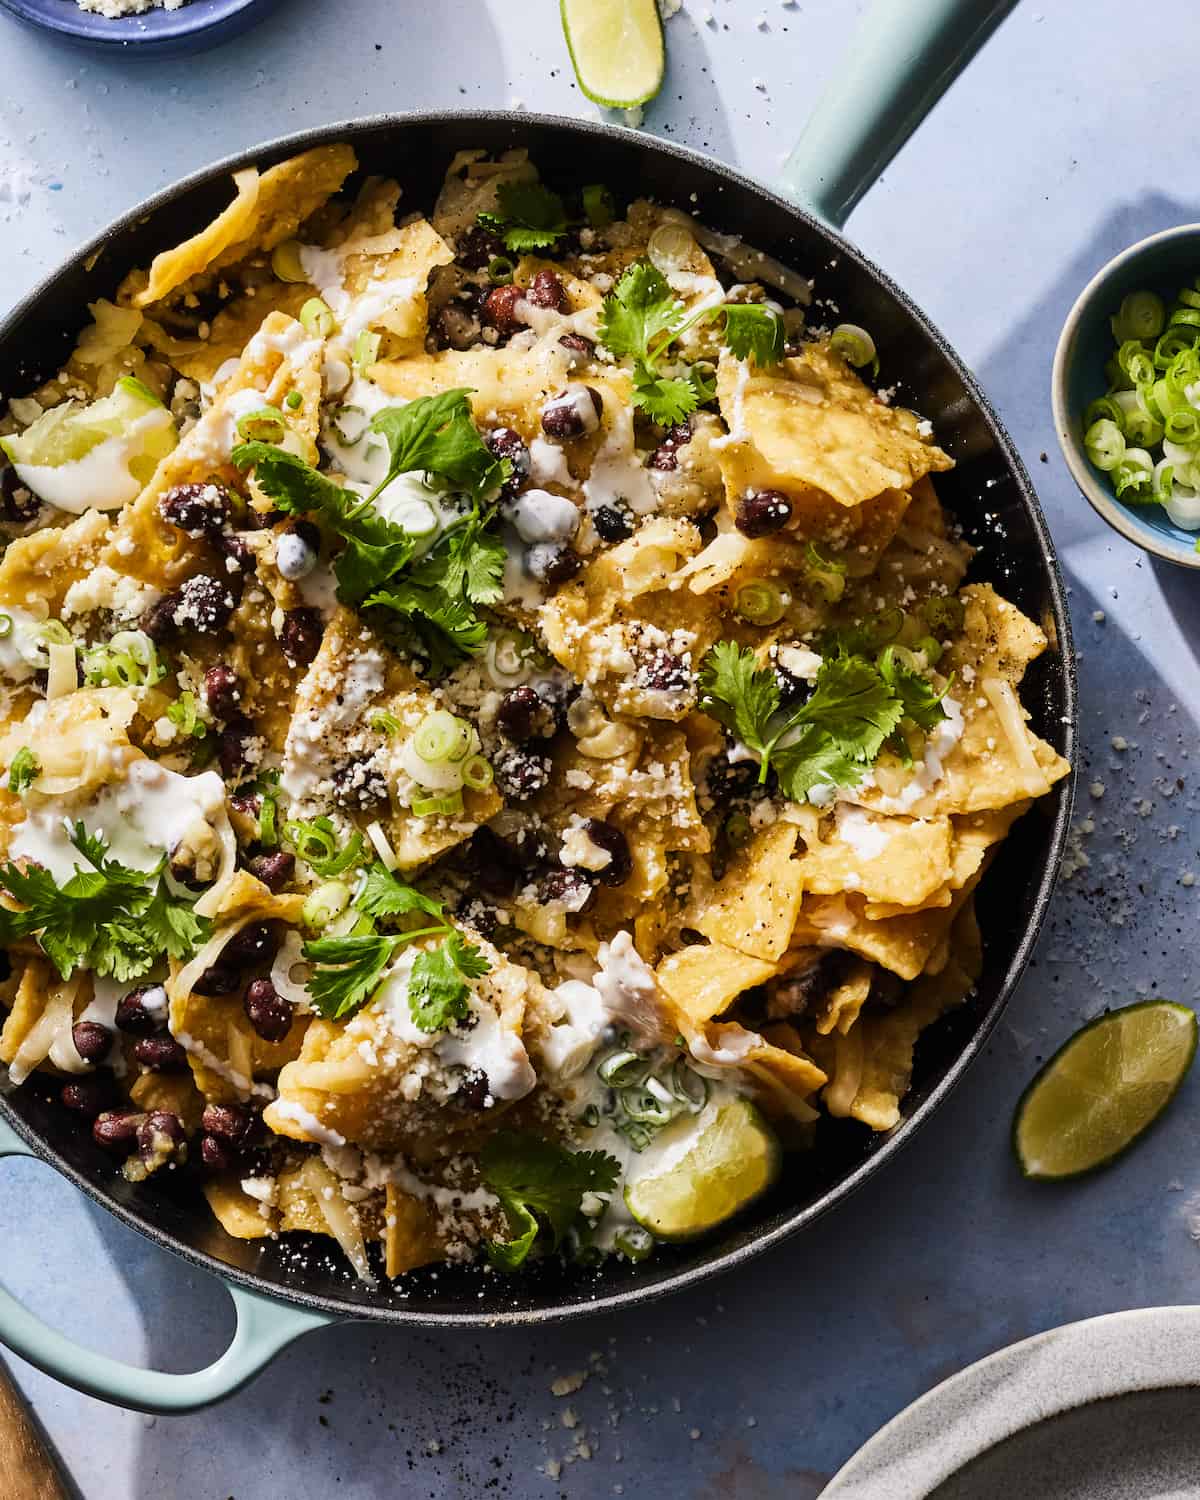 A large skillet with Chilaquiles next to a sliced lime and some sea salt sprinkled on the table.  